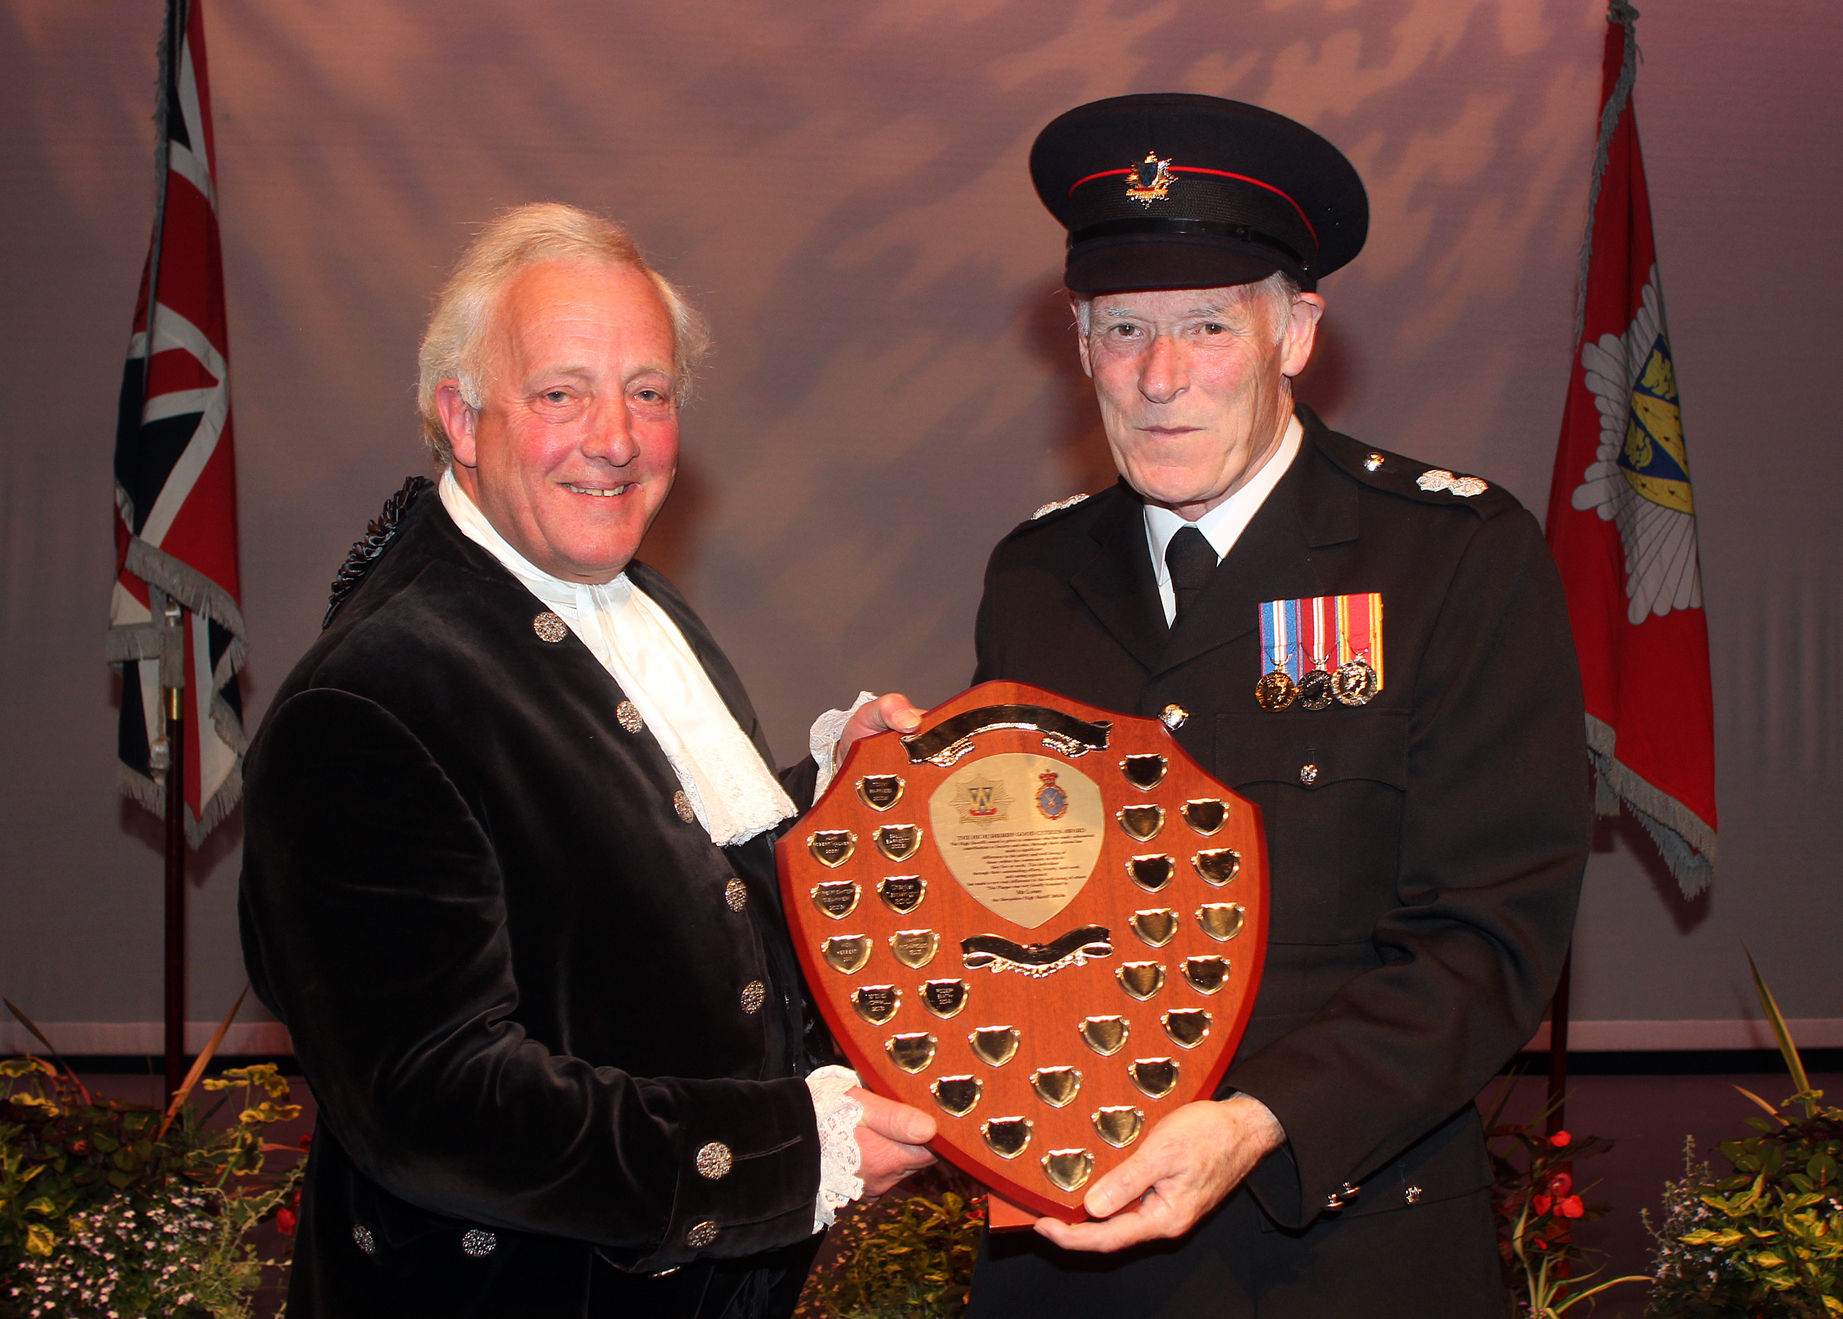 Shropshire High Sheriff Roger Bland presents Roger Smith with his award